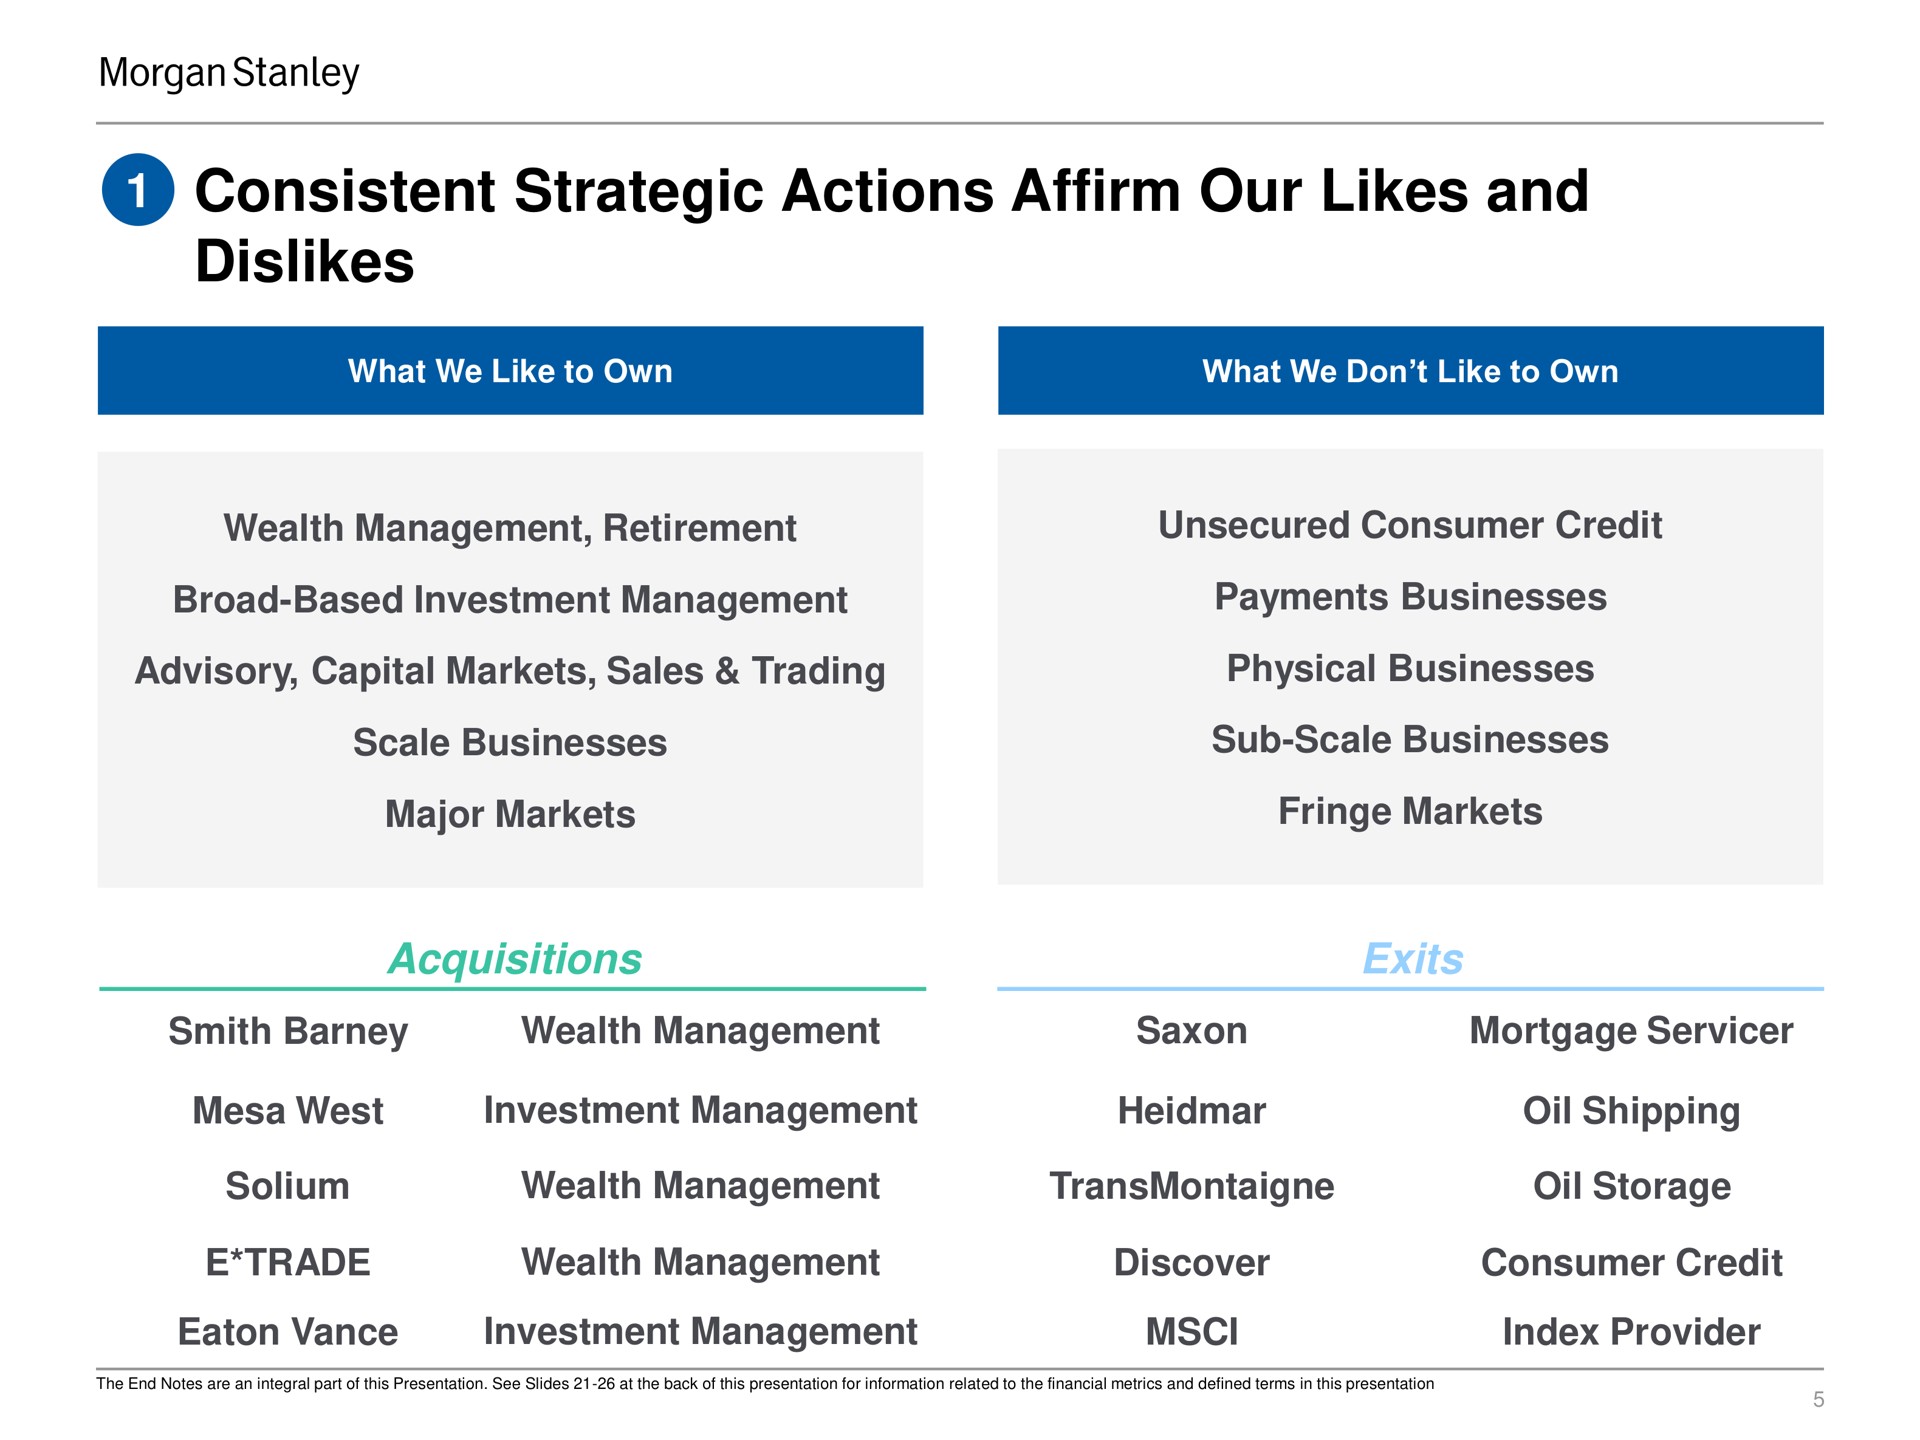 consistent strategic actions affirm our likes and dislikes acquisitions exits | Morgan Stanley